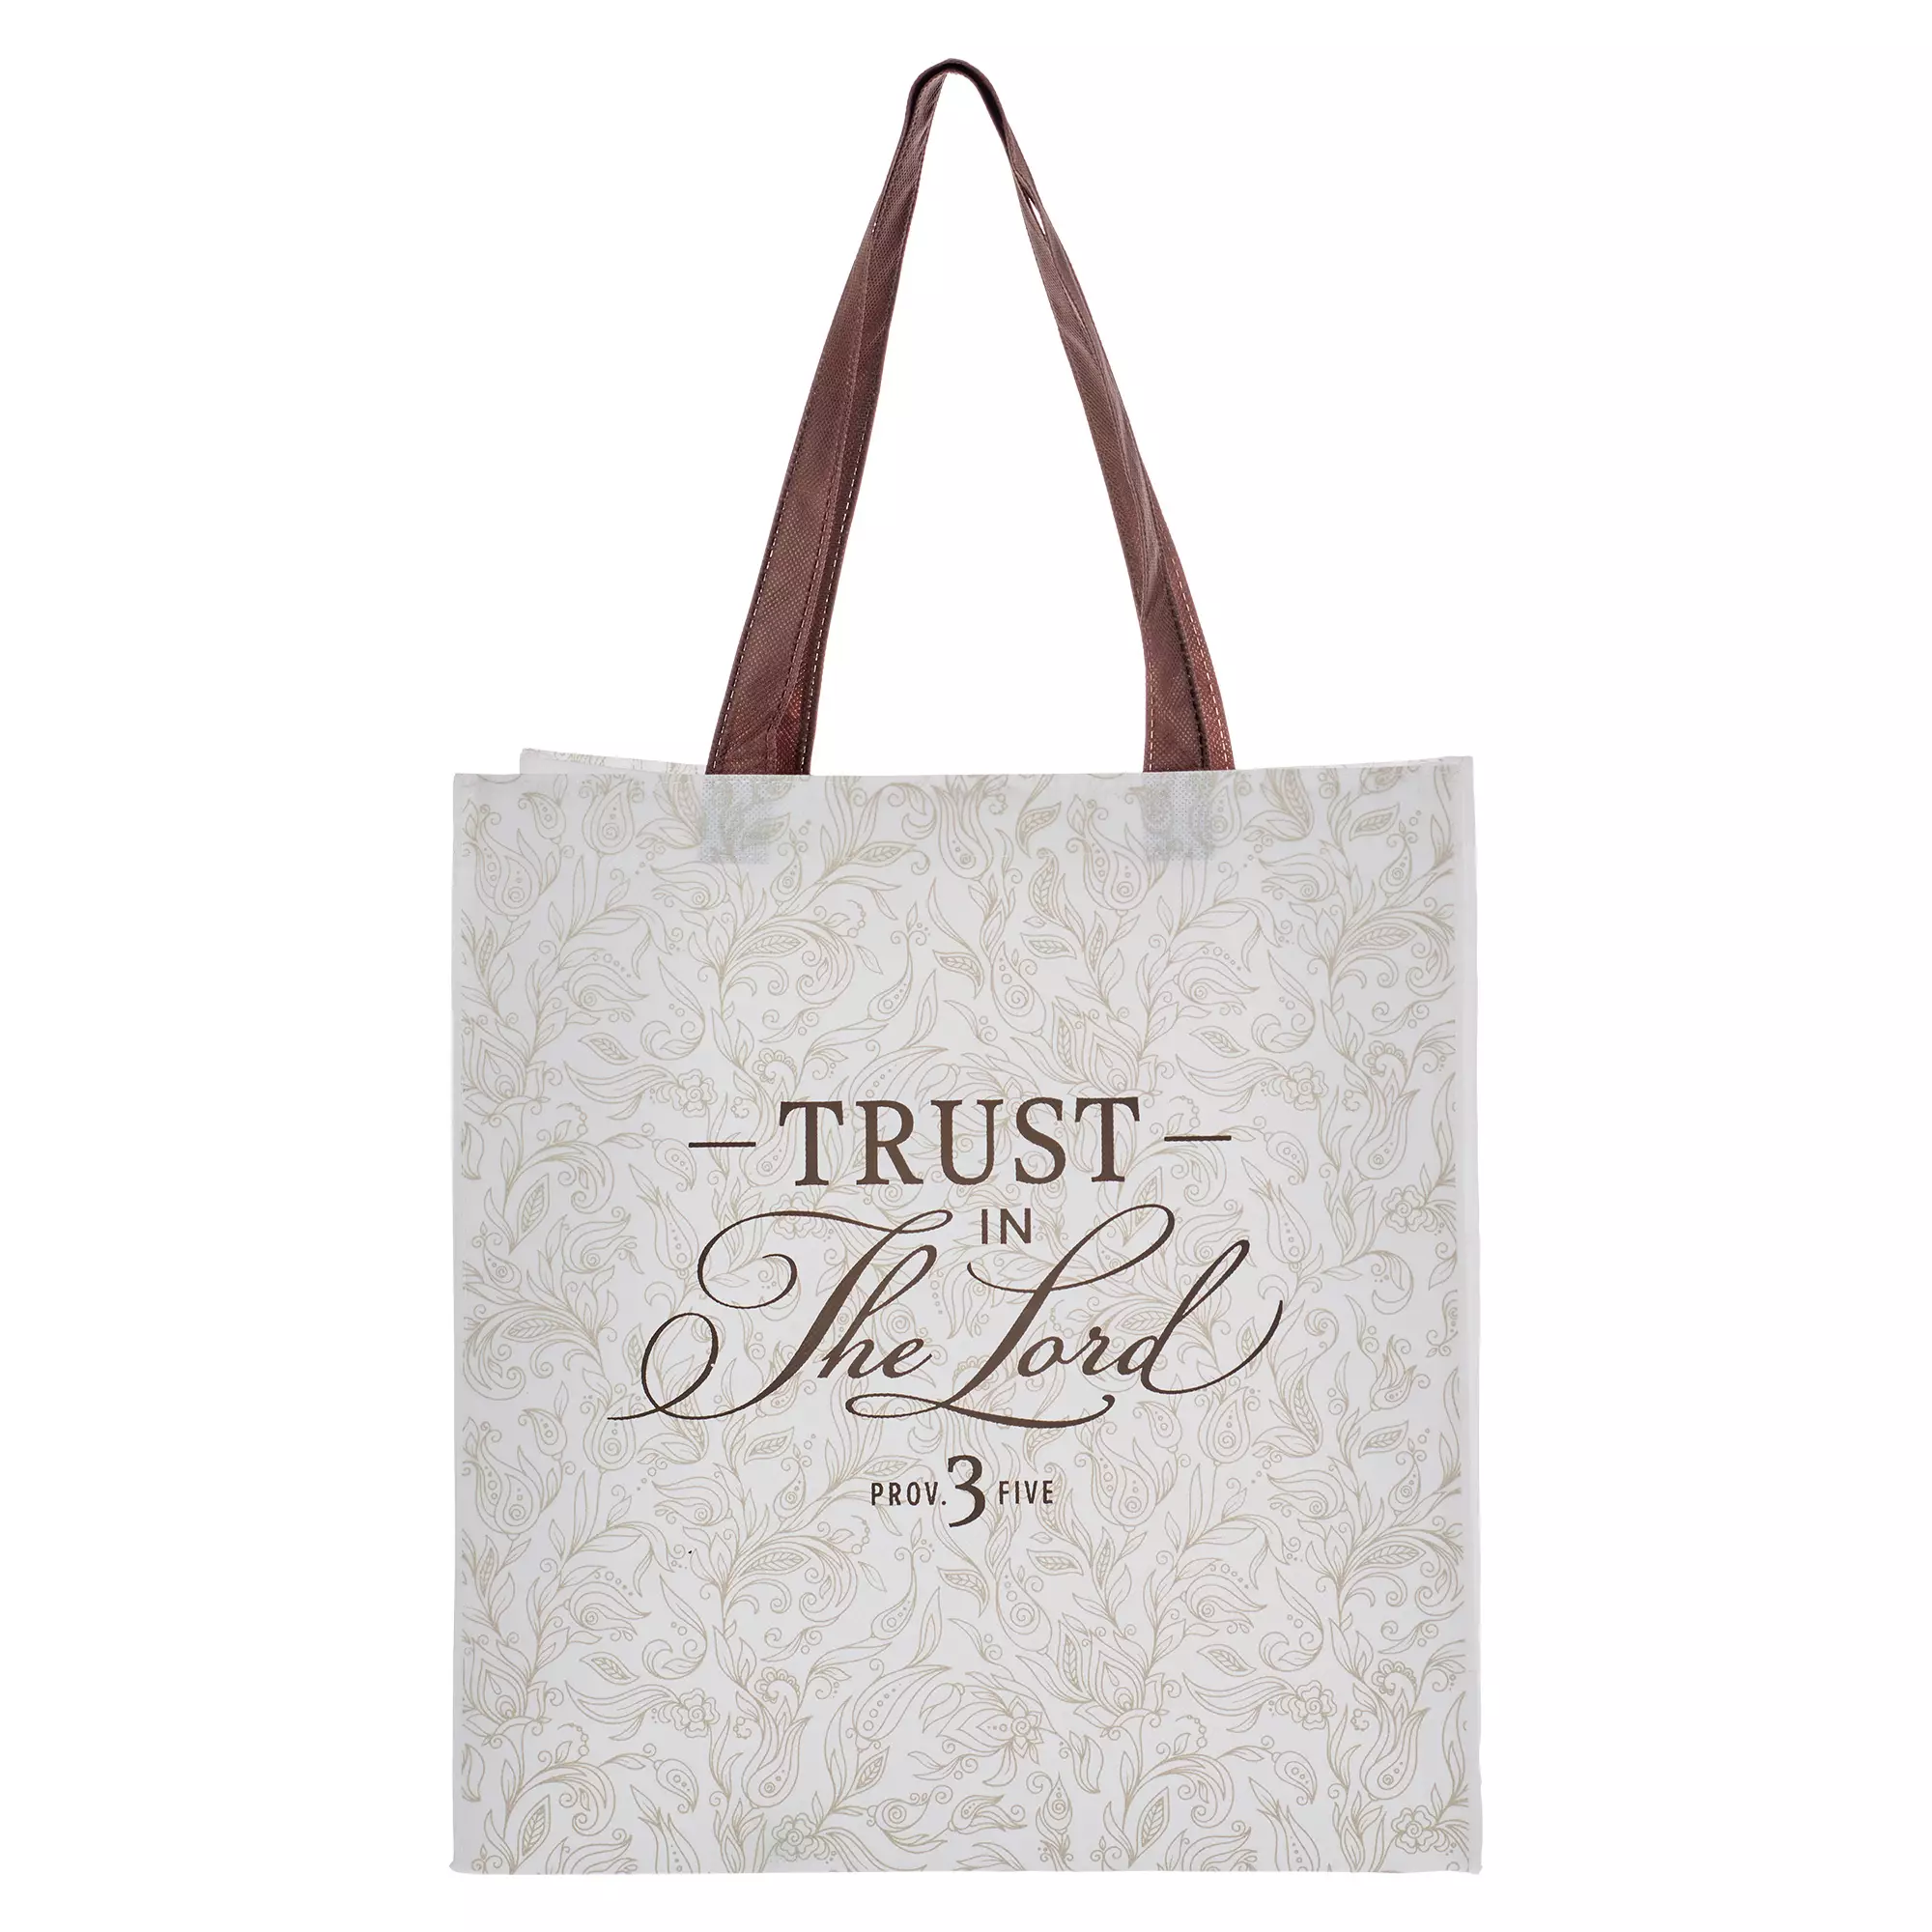 Trust in the Lord Tote Bag